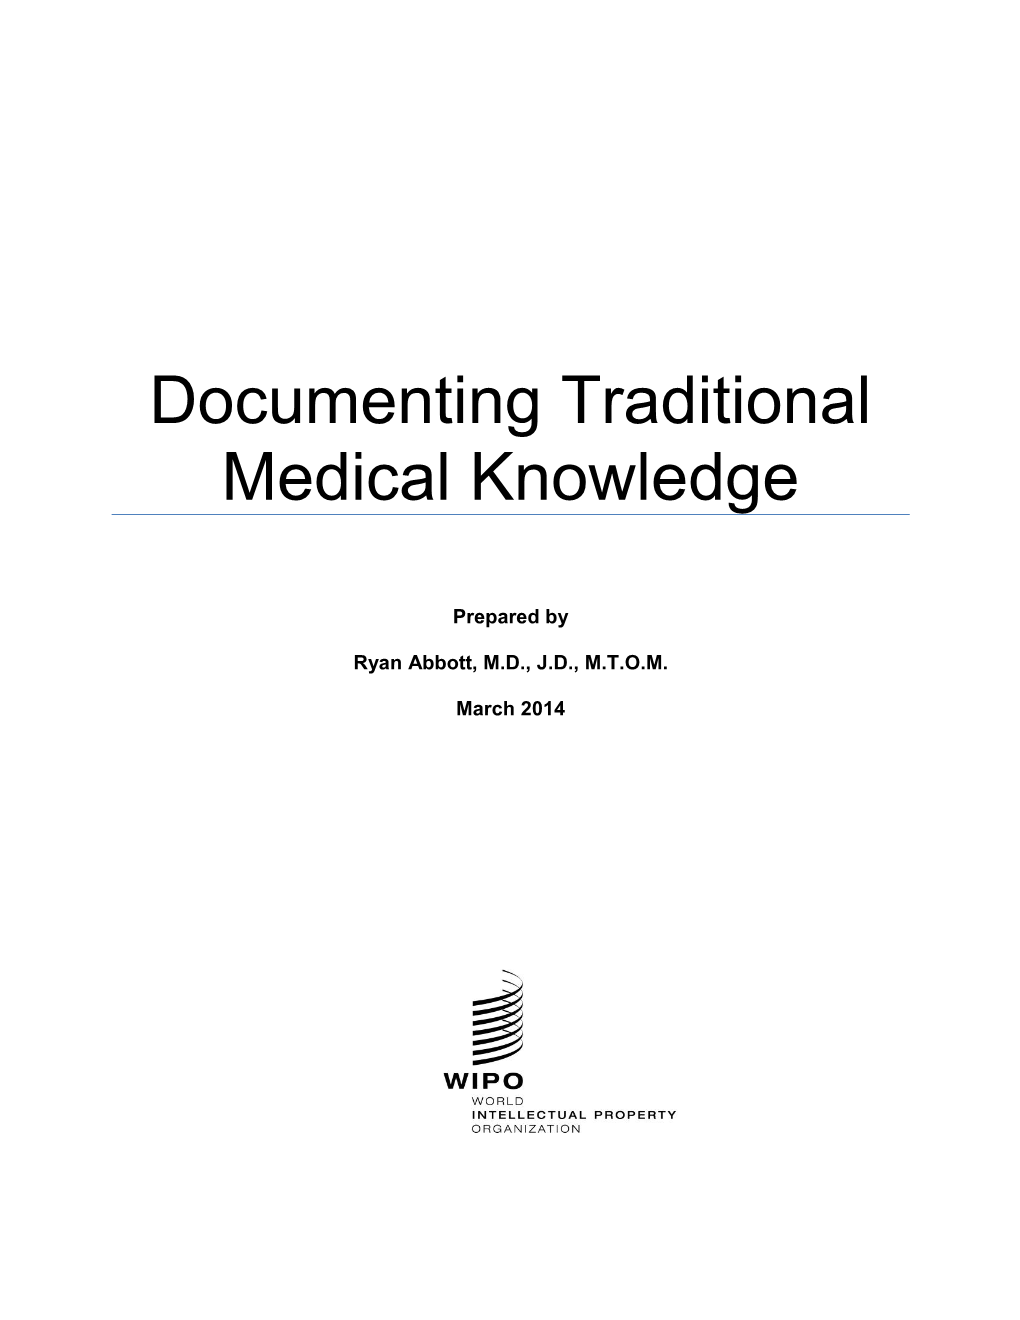 Documenting Traditional Medical Knowledge